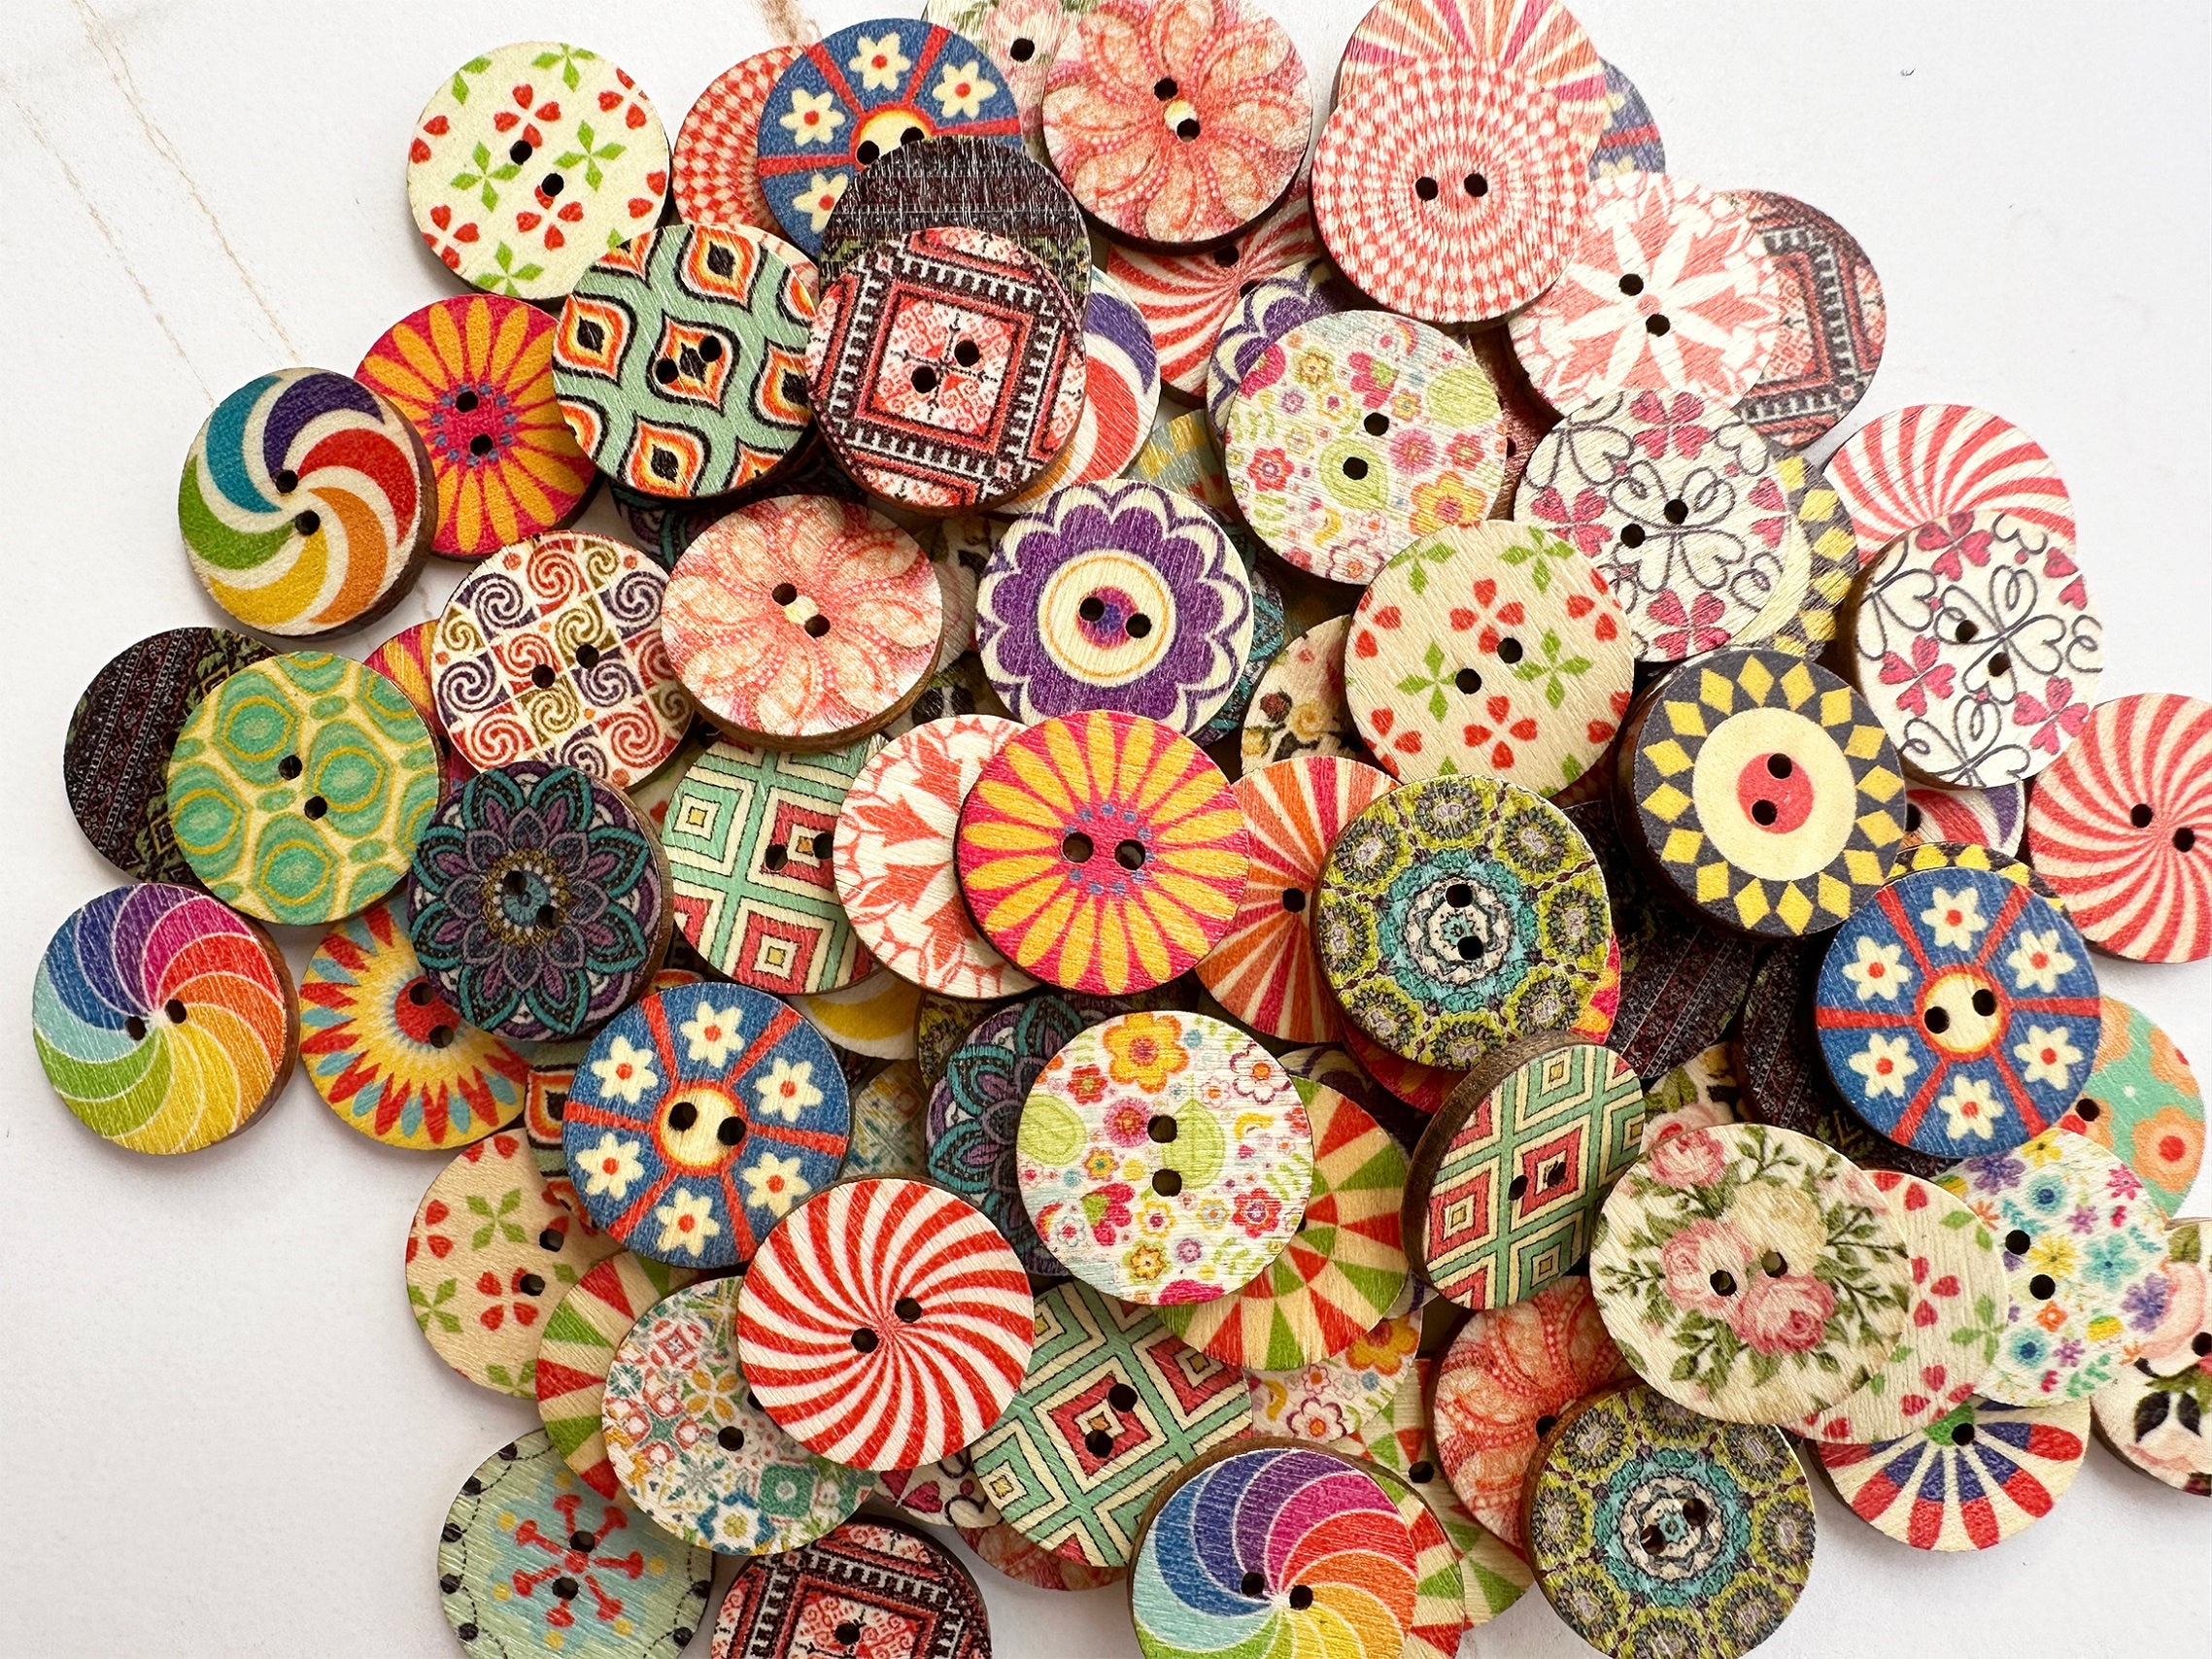  200pcs Wooden Star Buttons with 2 Holes Rustic Sewing Buttons  Lovely Mini Wood Button for Costume Design Clothes Scrapbooking Art Crafts  DIY Decoration